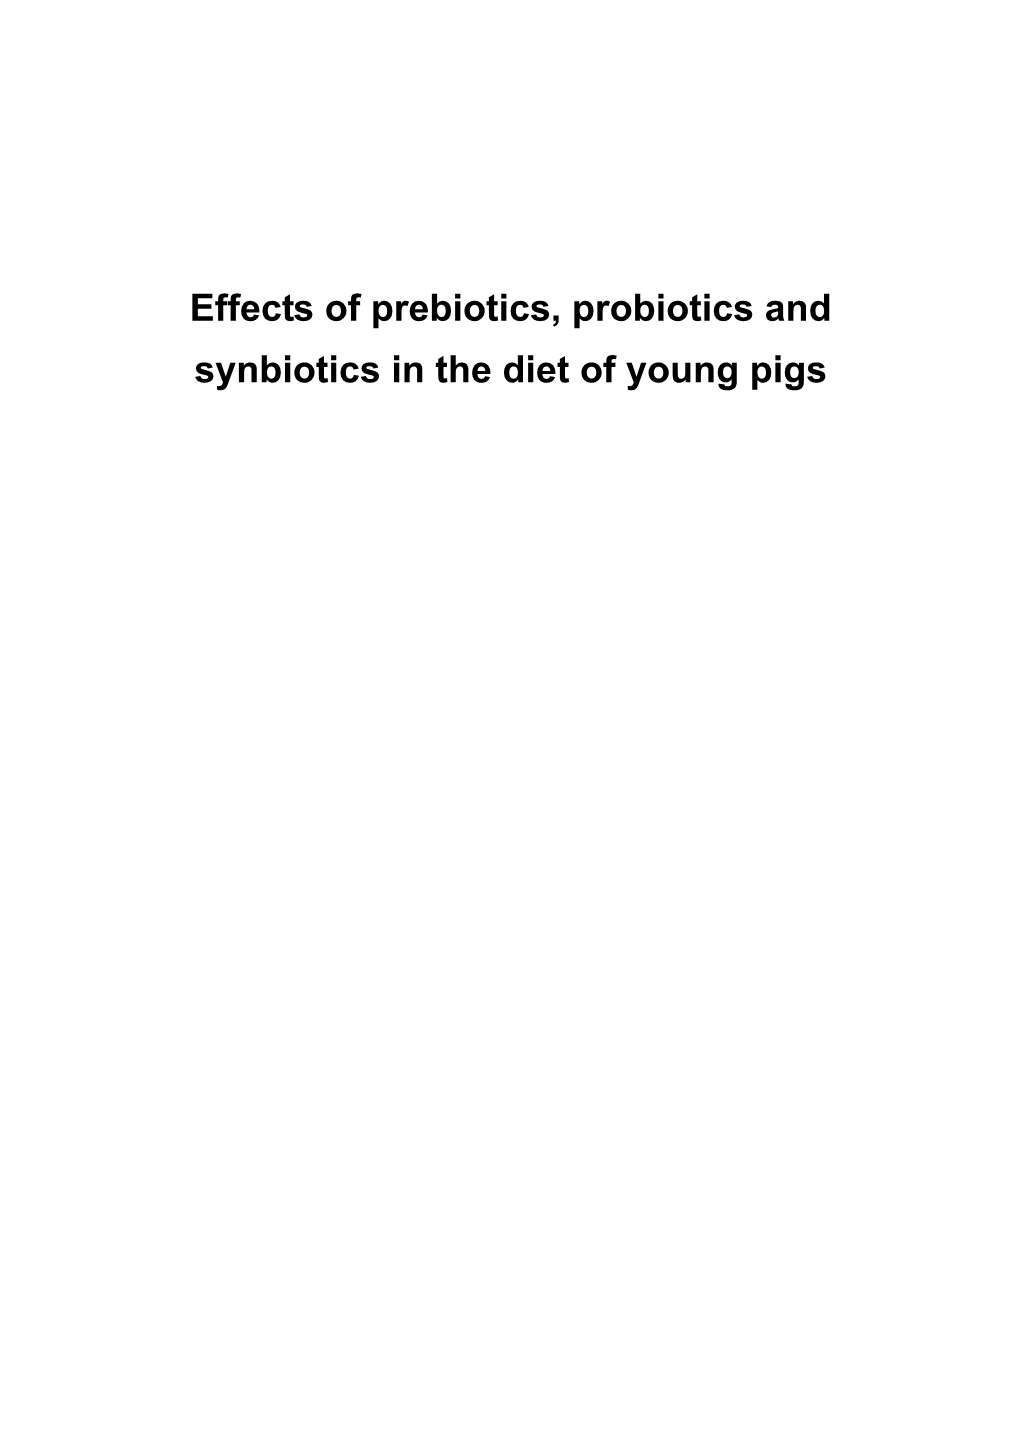 Effects of Prebiotics, Probiotics and Synbiotics in the Diet of Young Pigs